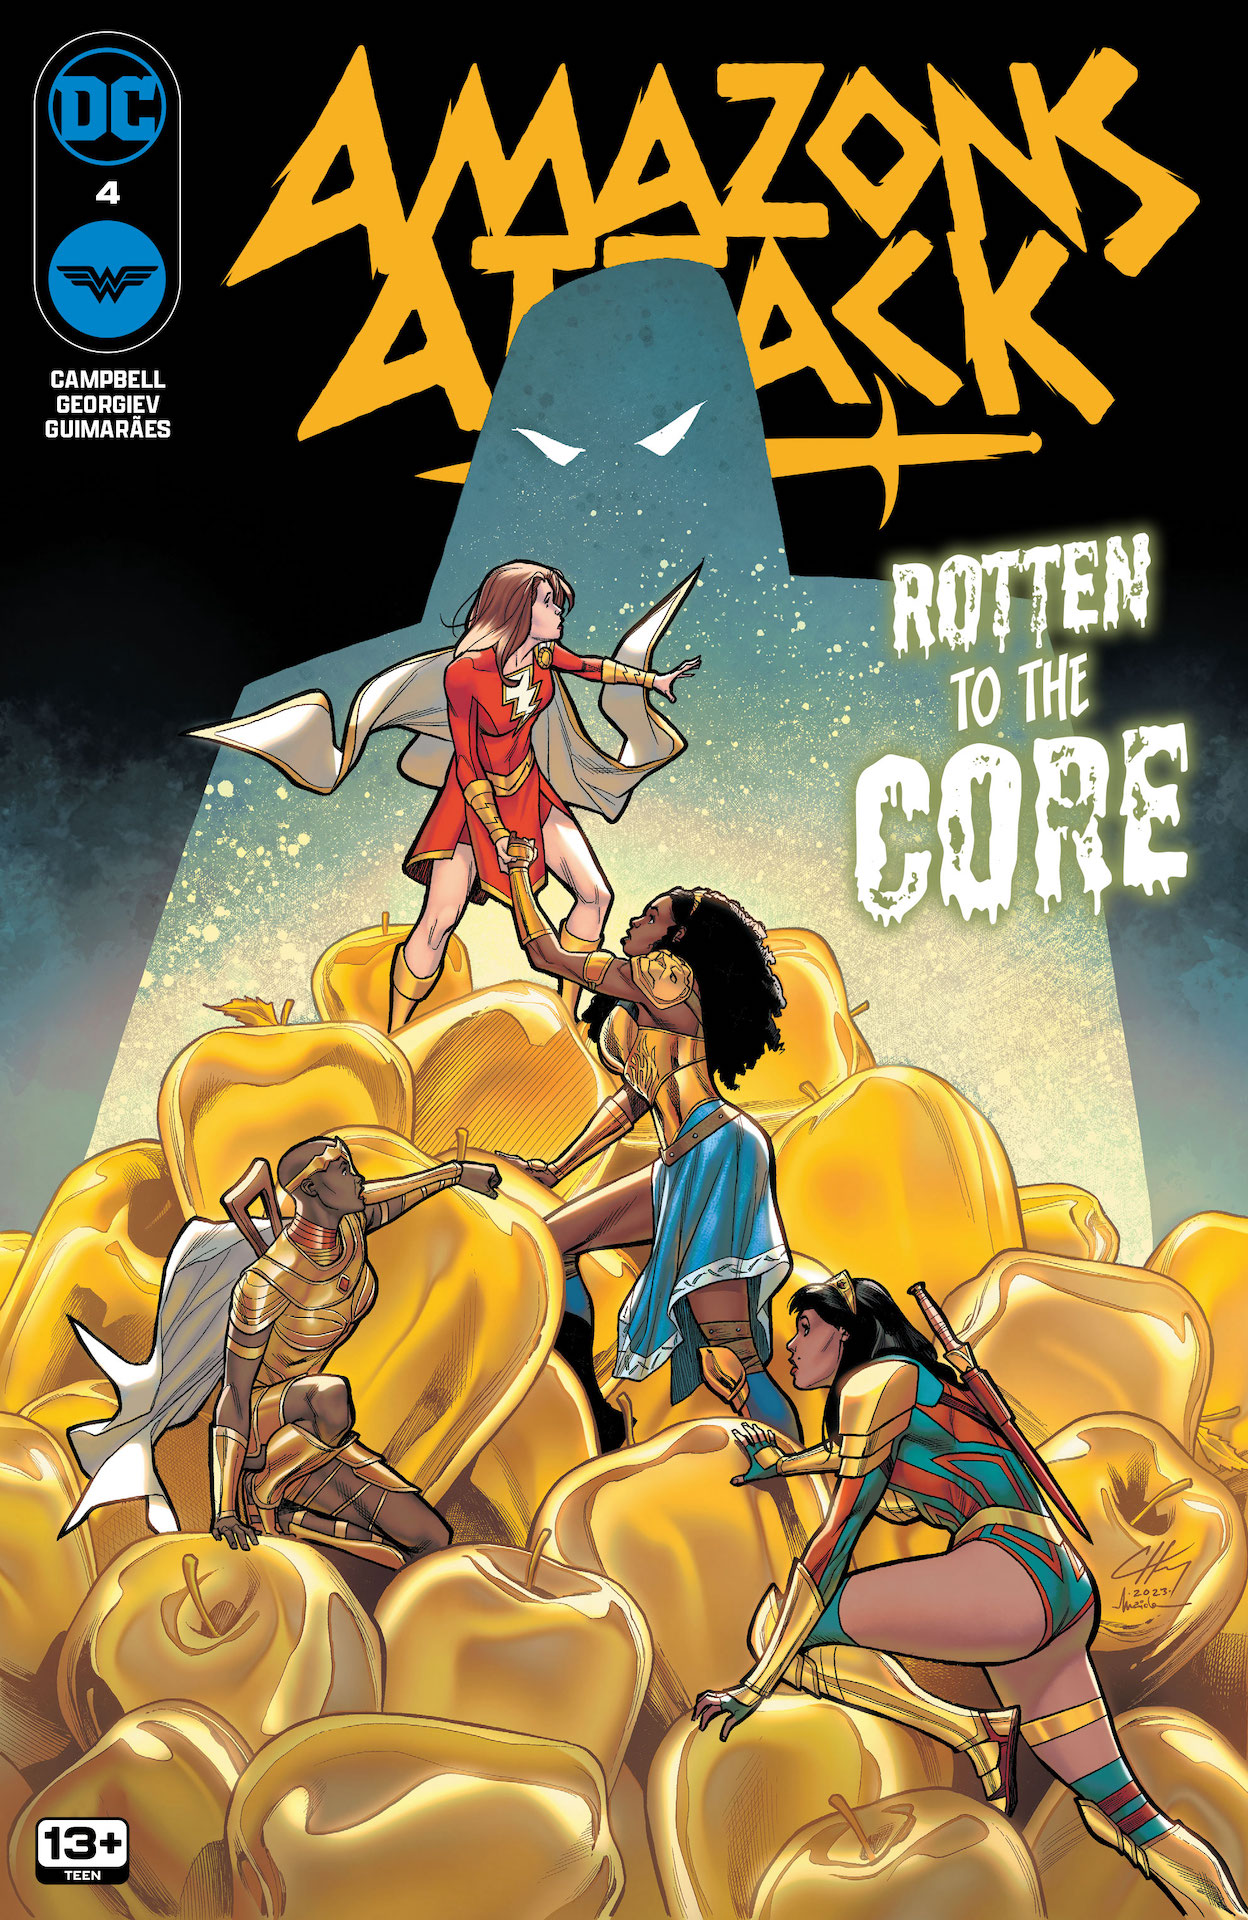 DC Preview: Amazons Attack #4